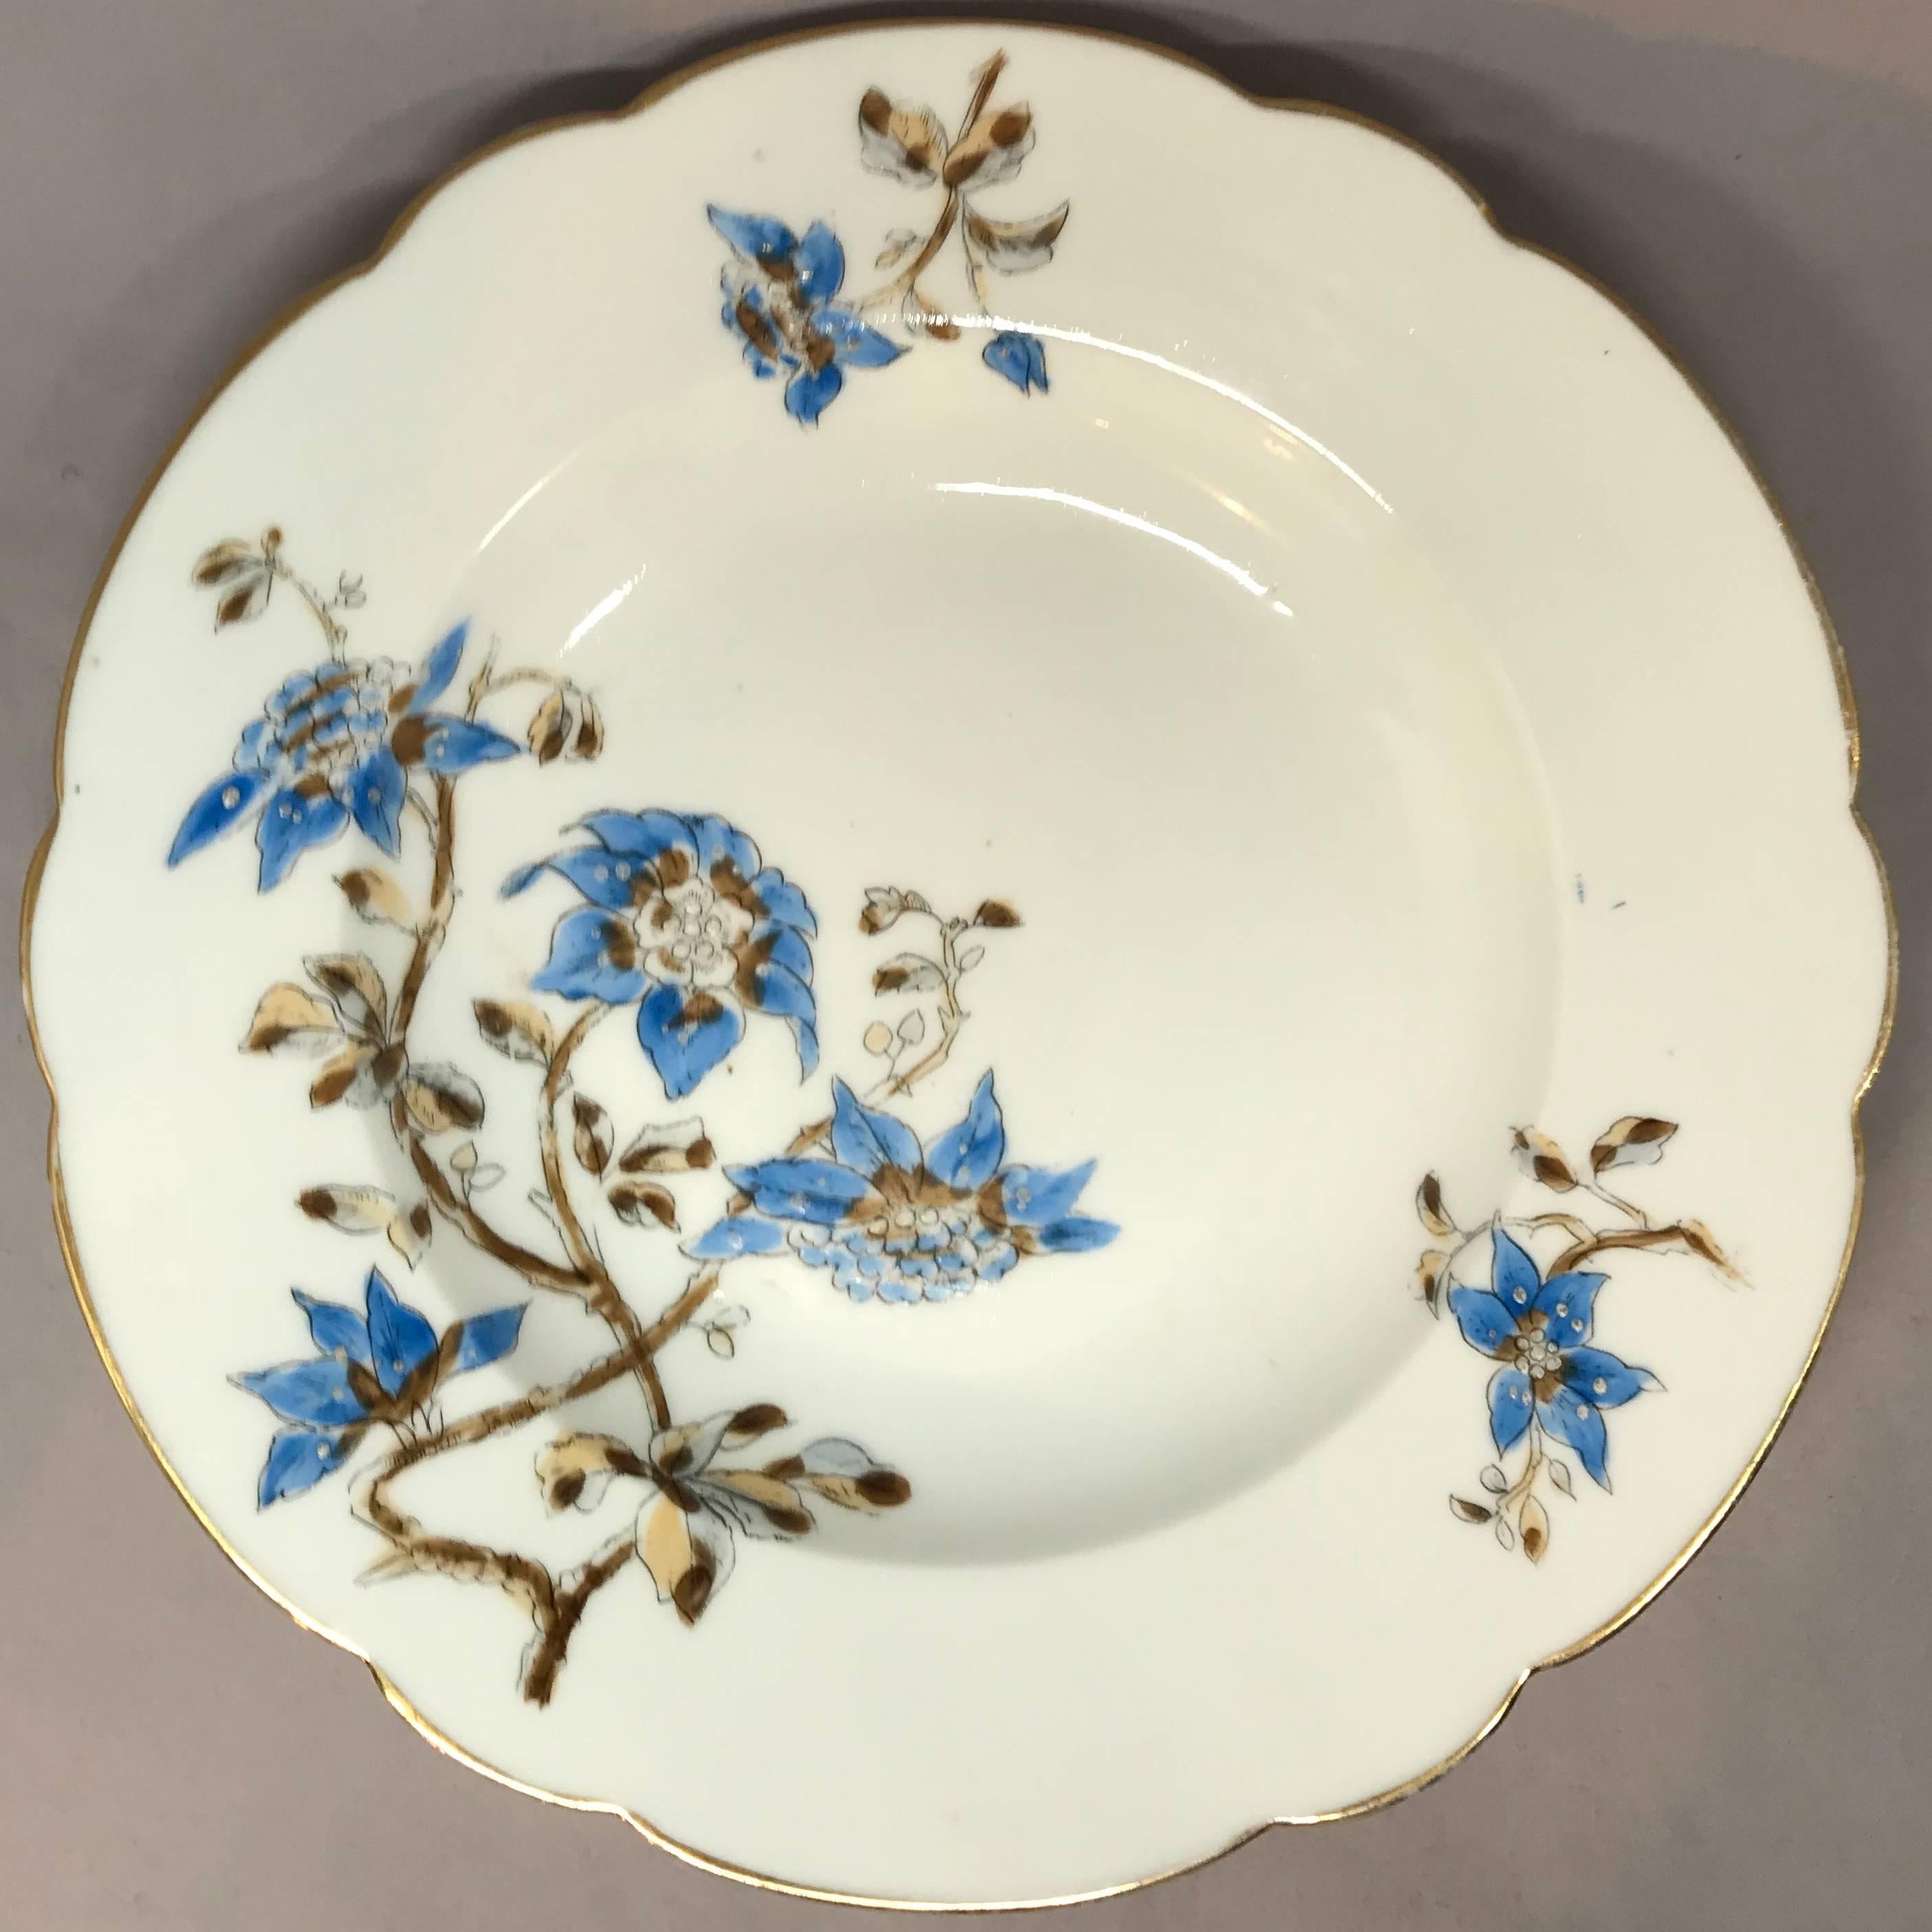 Set of five Italian blue and white floral plates. Five gilt-edged lobed soup plates with blue and brown floral decoration, Italy, circa 1890. 
Dimensions: 9.88